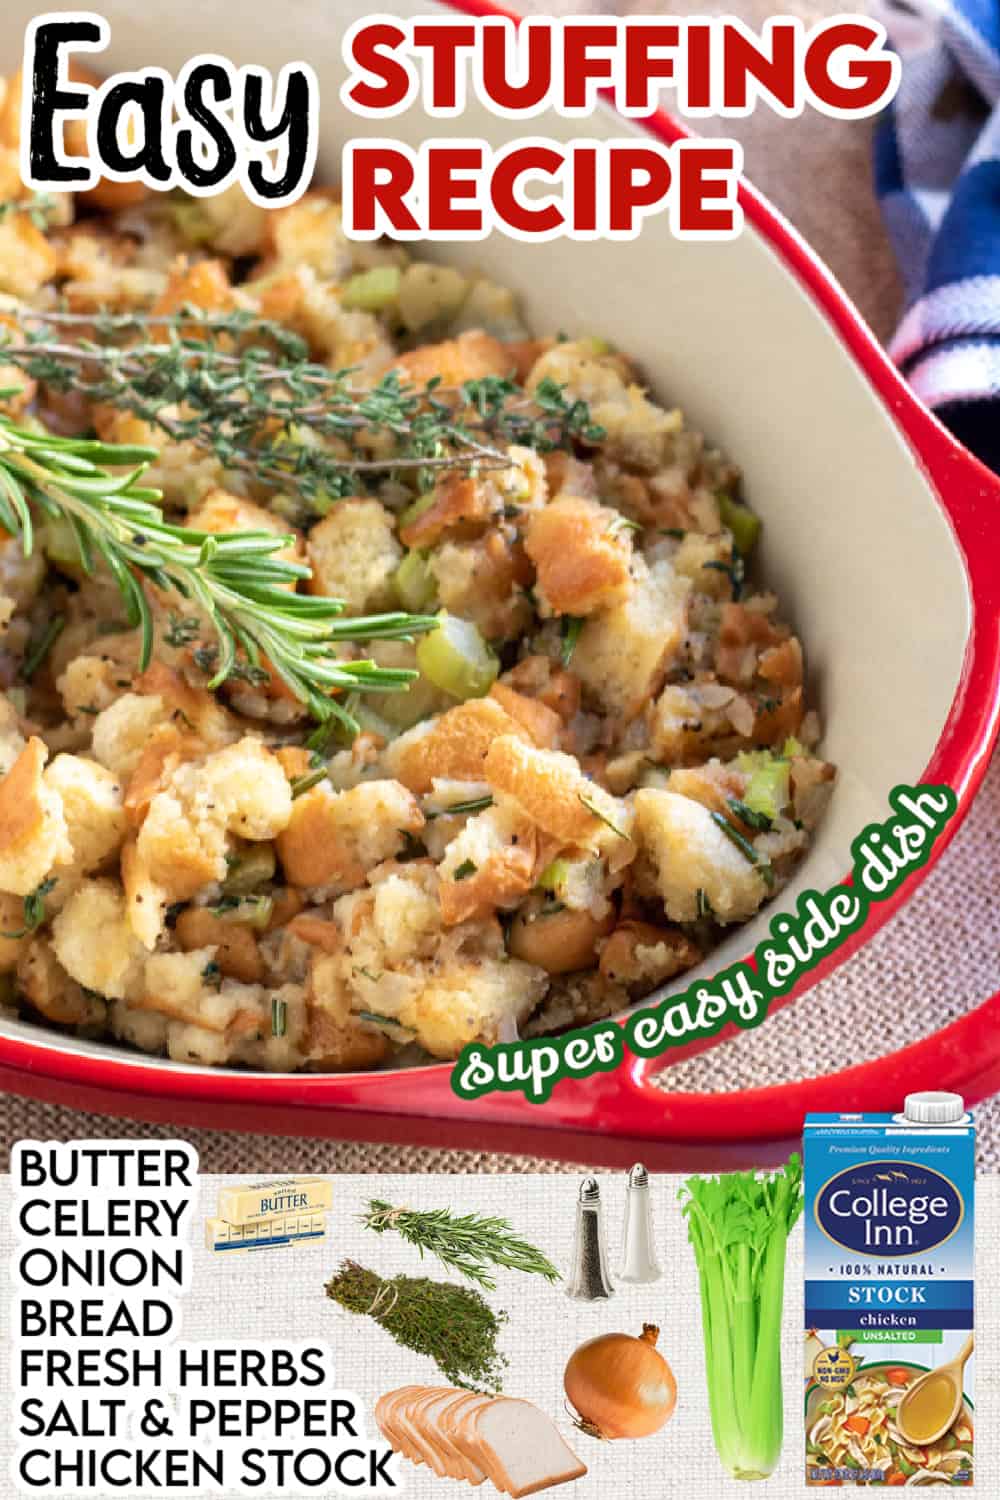 collage of stuffing recipe with recipe name and ingredients overlaid in text.